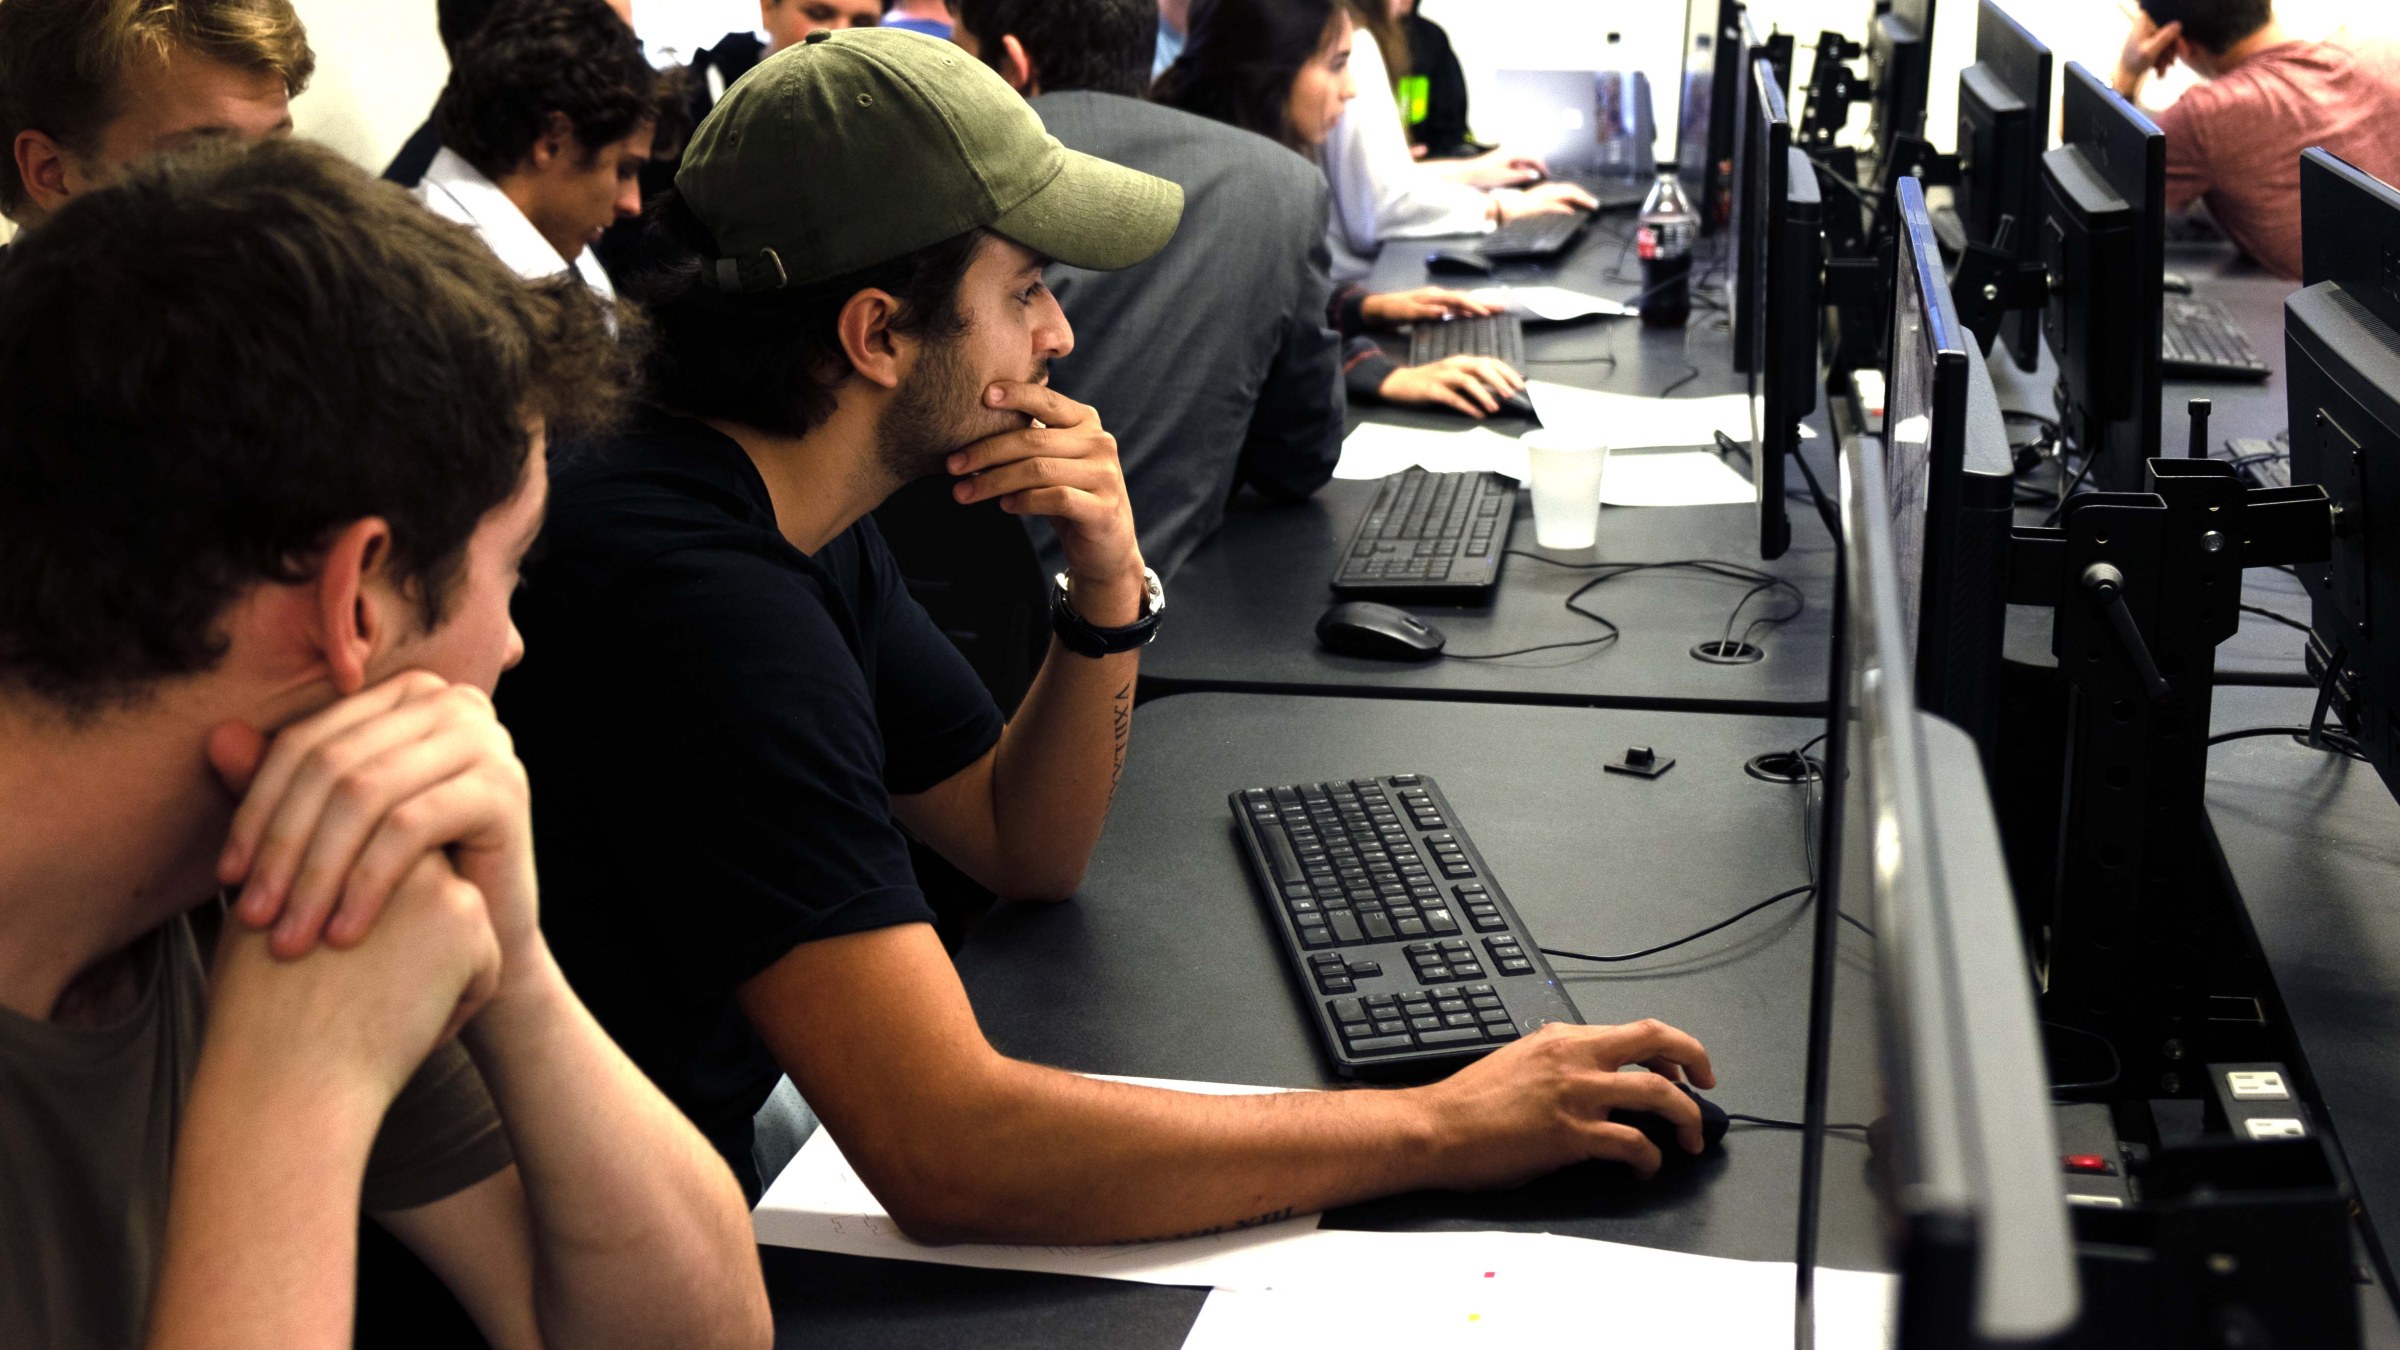 students working on computers in the computer lab